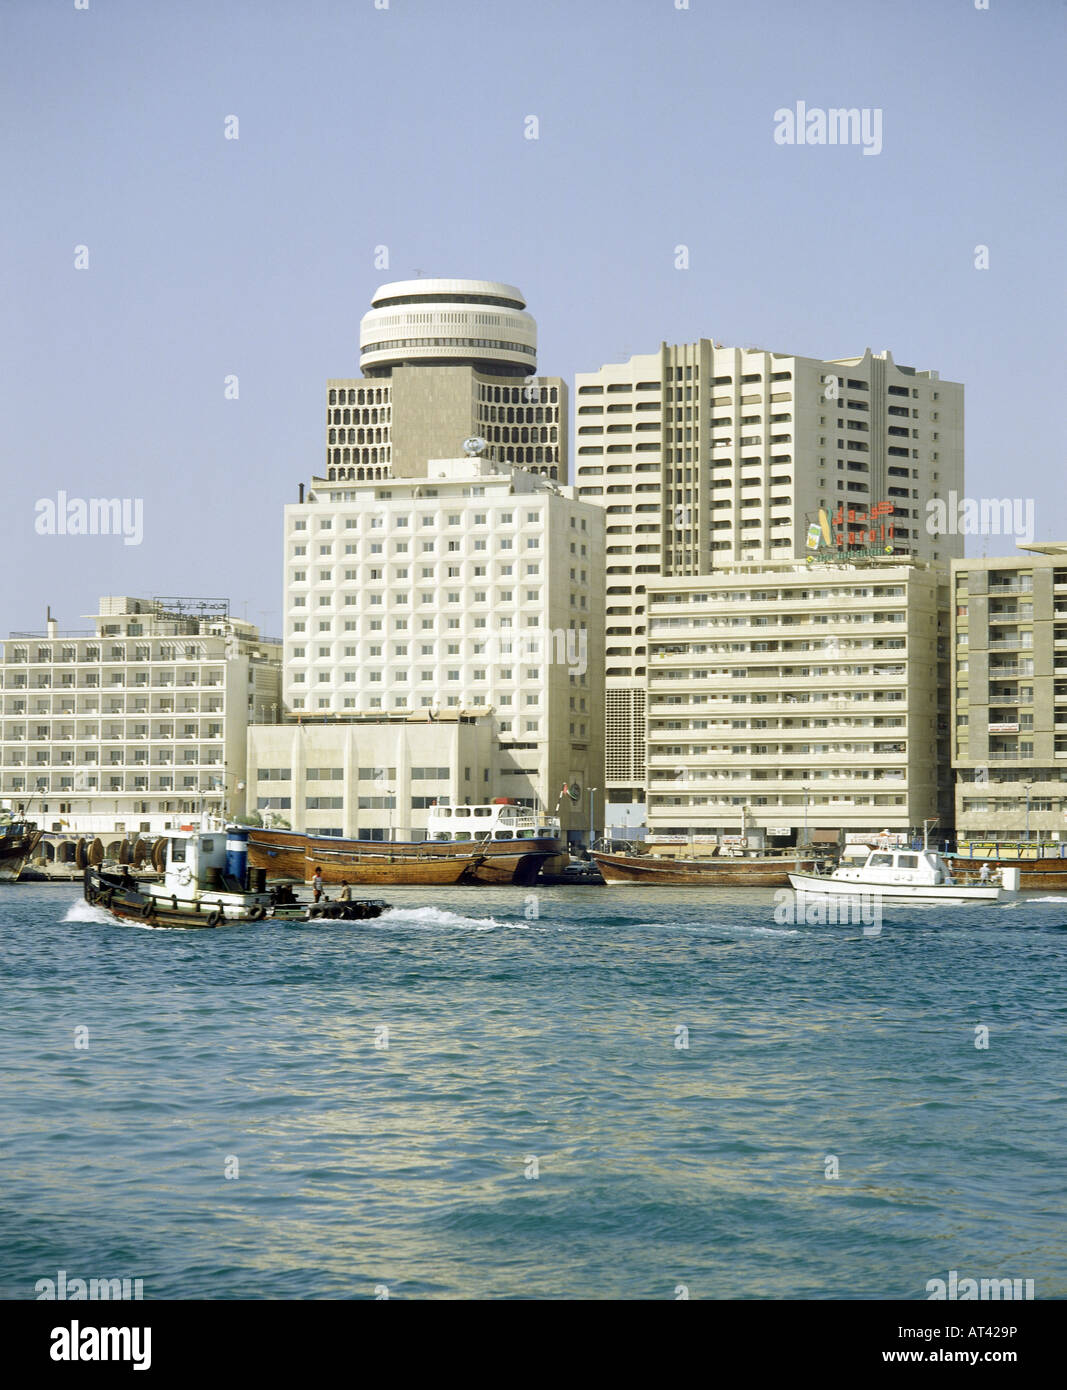 geography / travel, United Arab Emirates, Dubai, buildings, new buildings, building, architecture, boats, port, harbour, dubayy, Stock Photo